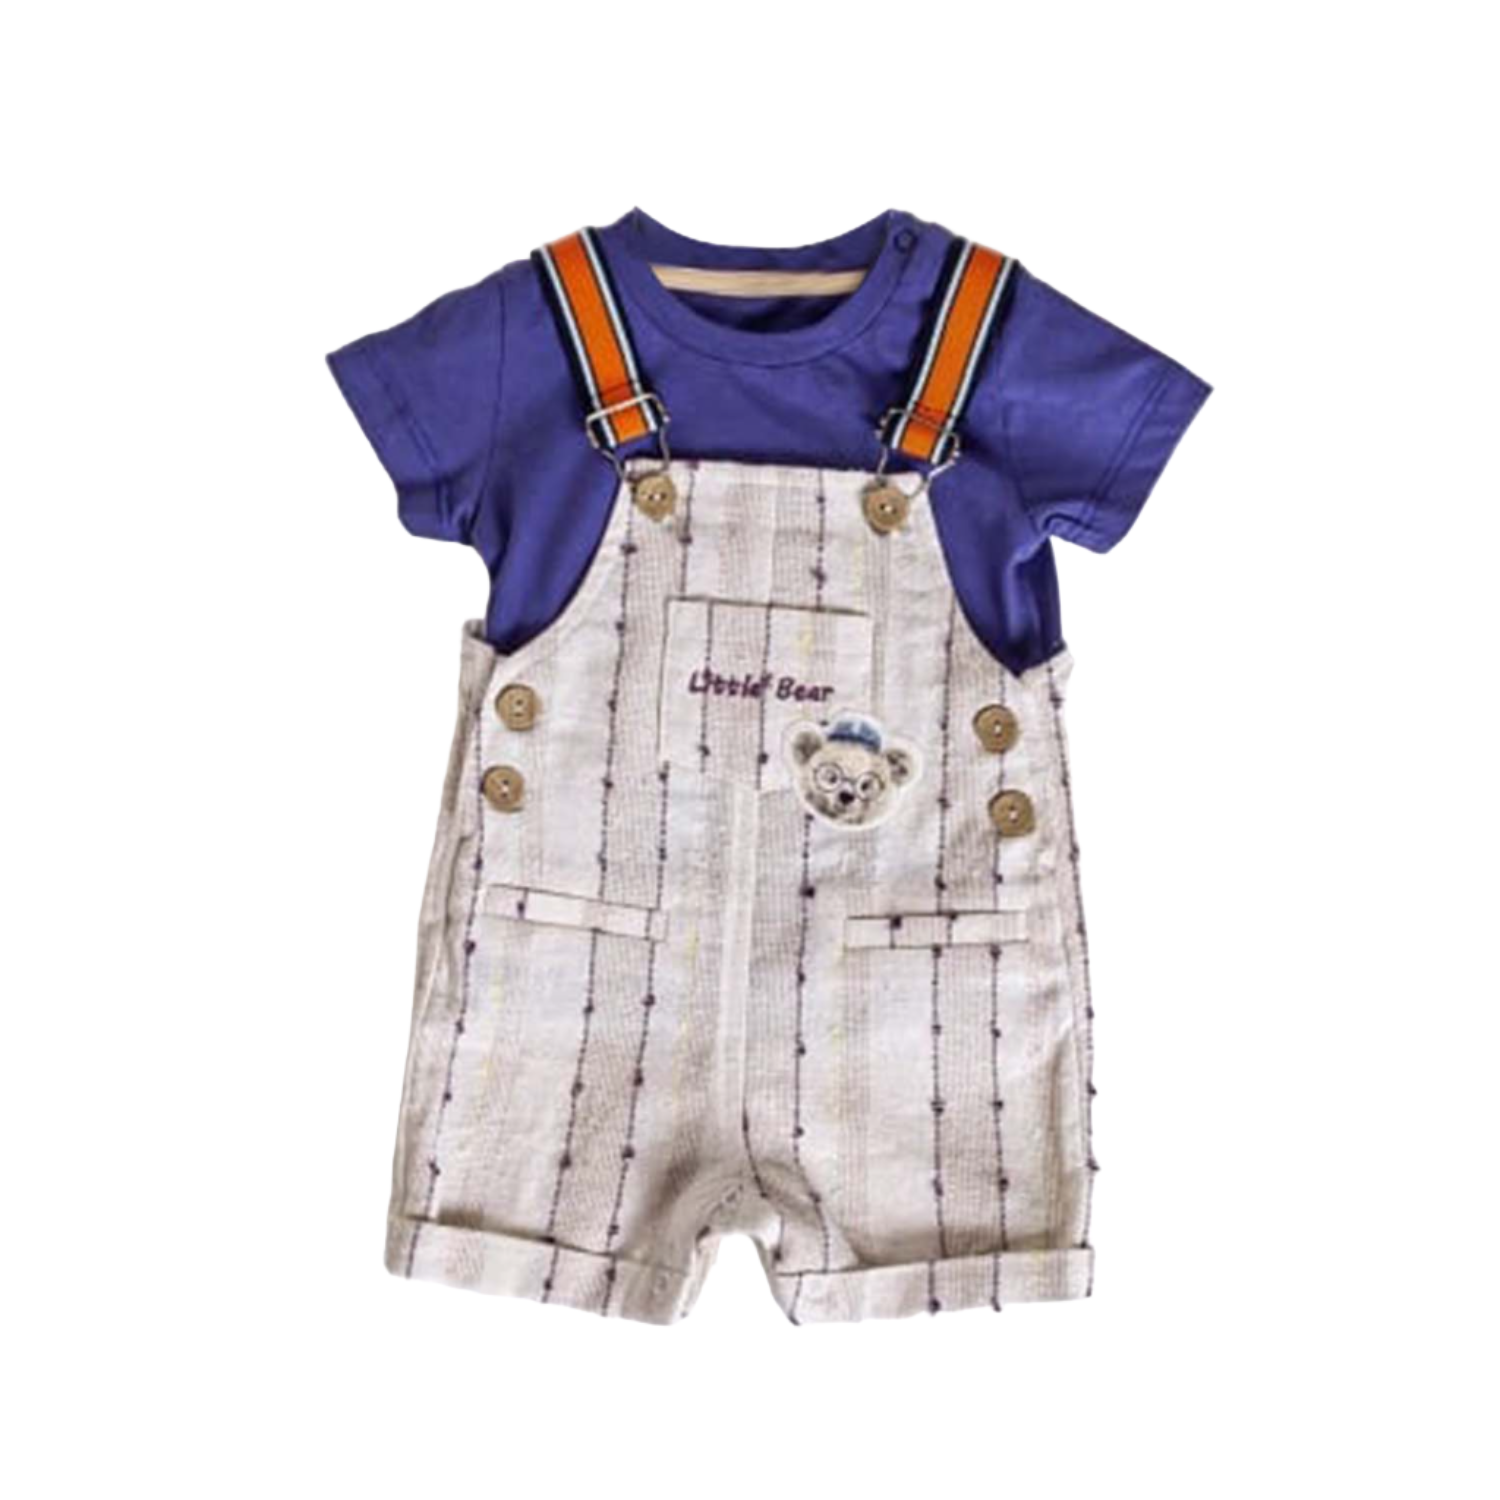 Infant Boys' Shortalls Green, Orange and Purple 2-Piece Set Perfect for Summer - 0